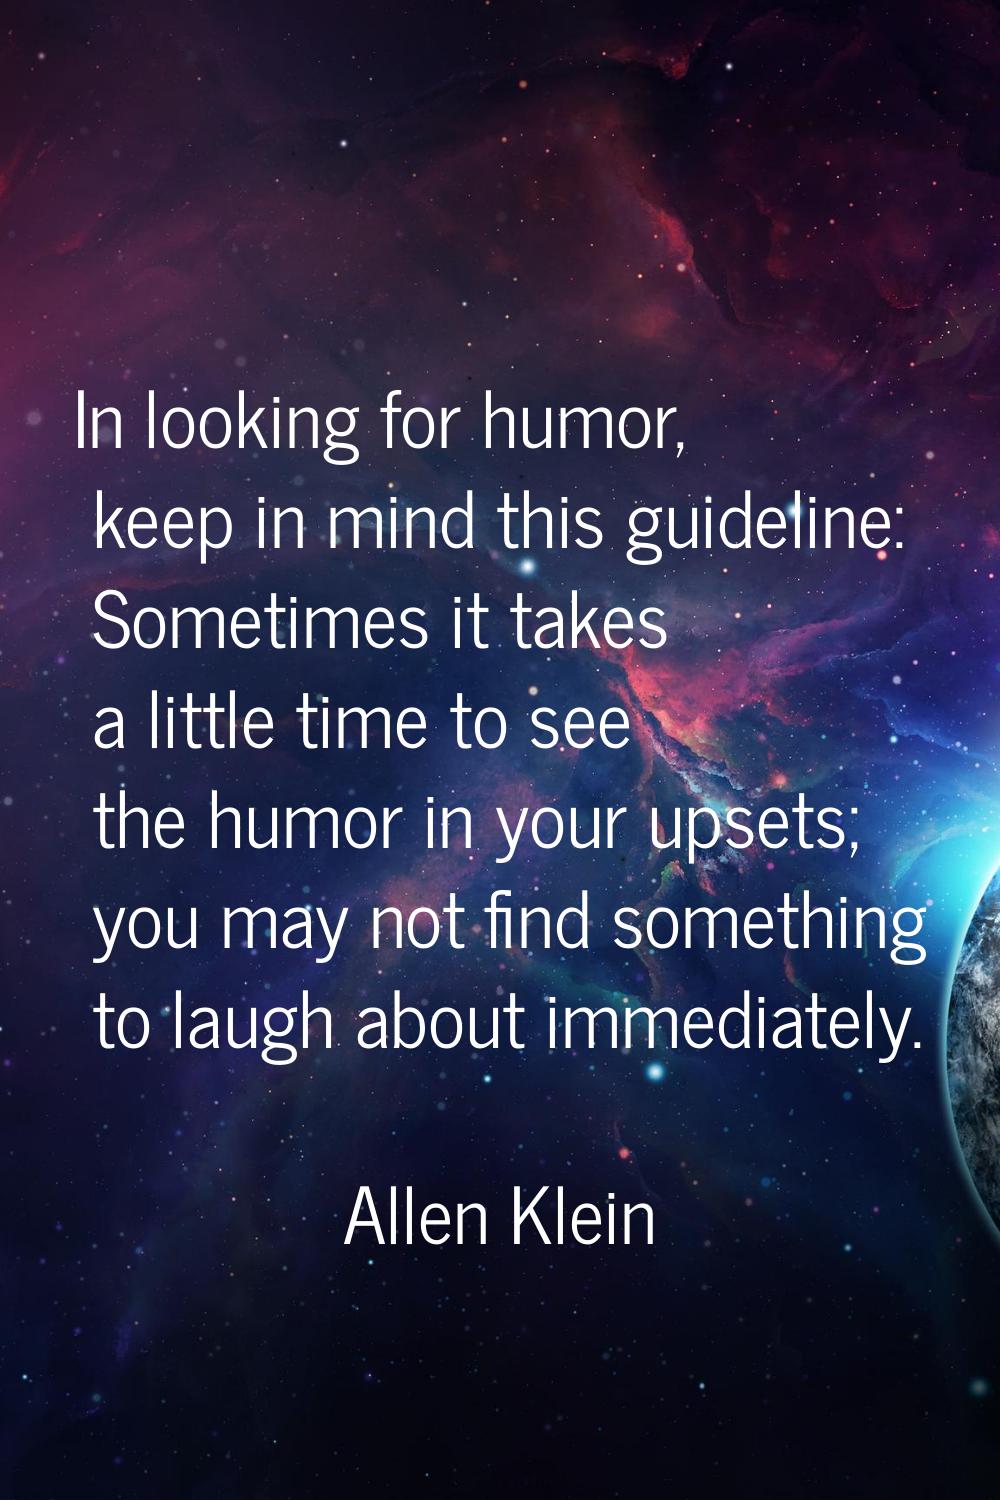 In looking for humor, keep in mind this guideline: Sometimes it takes a little time to see the humo